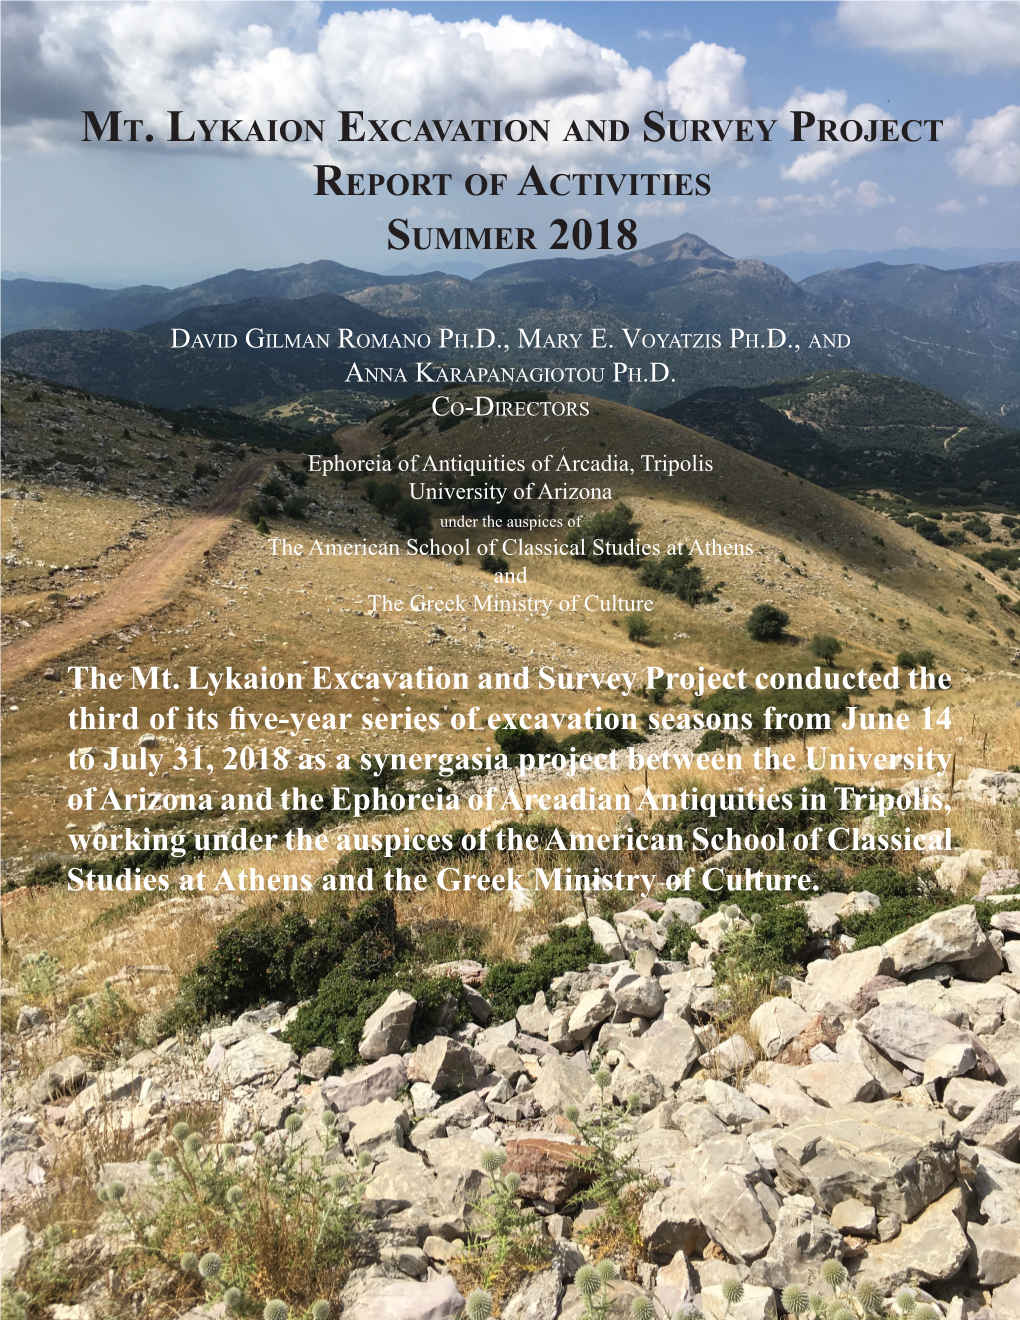 Mt. Lykaion Excavation and Survey Project Report of Activities Summer 2018